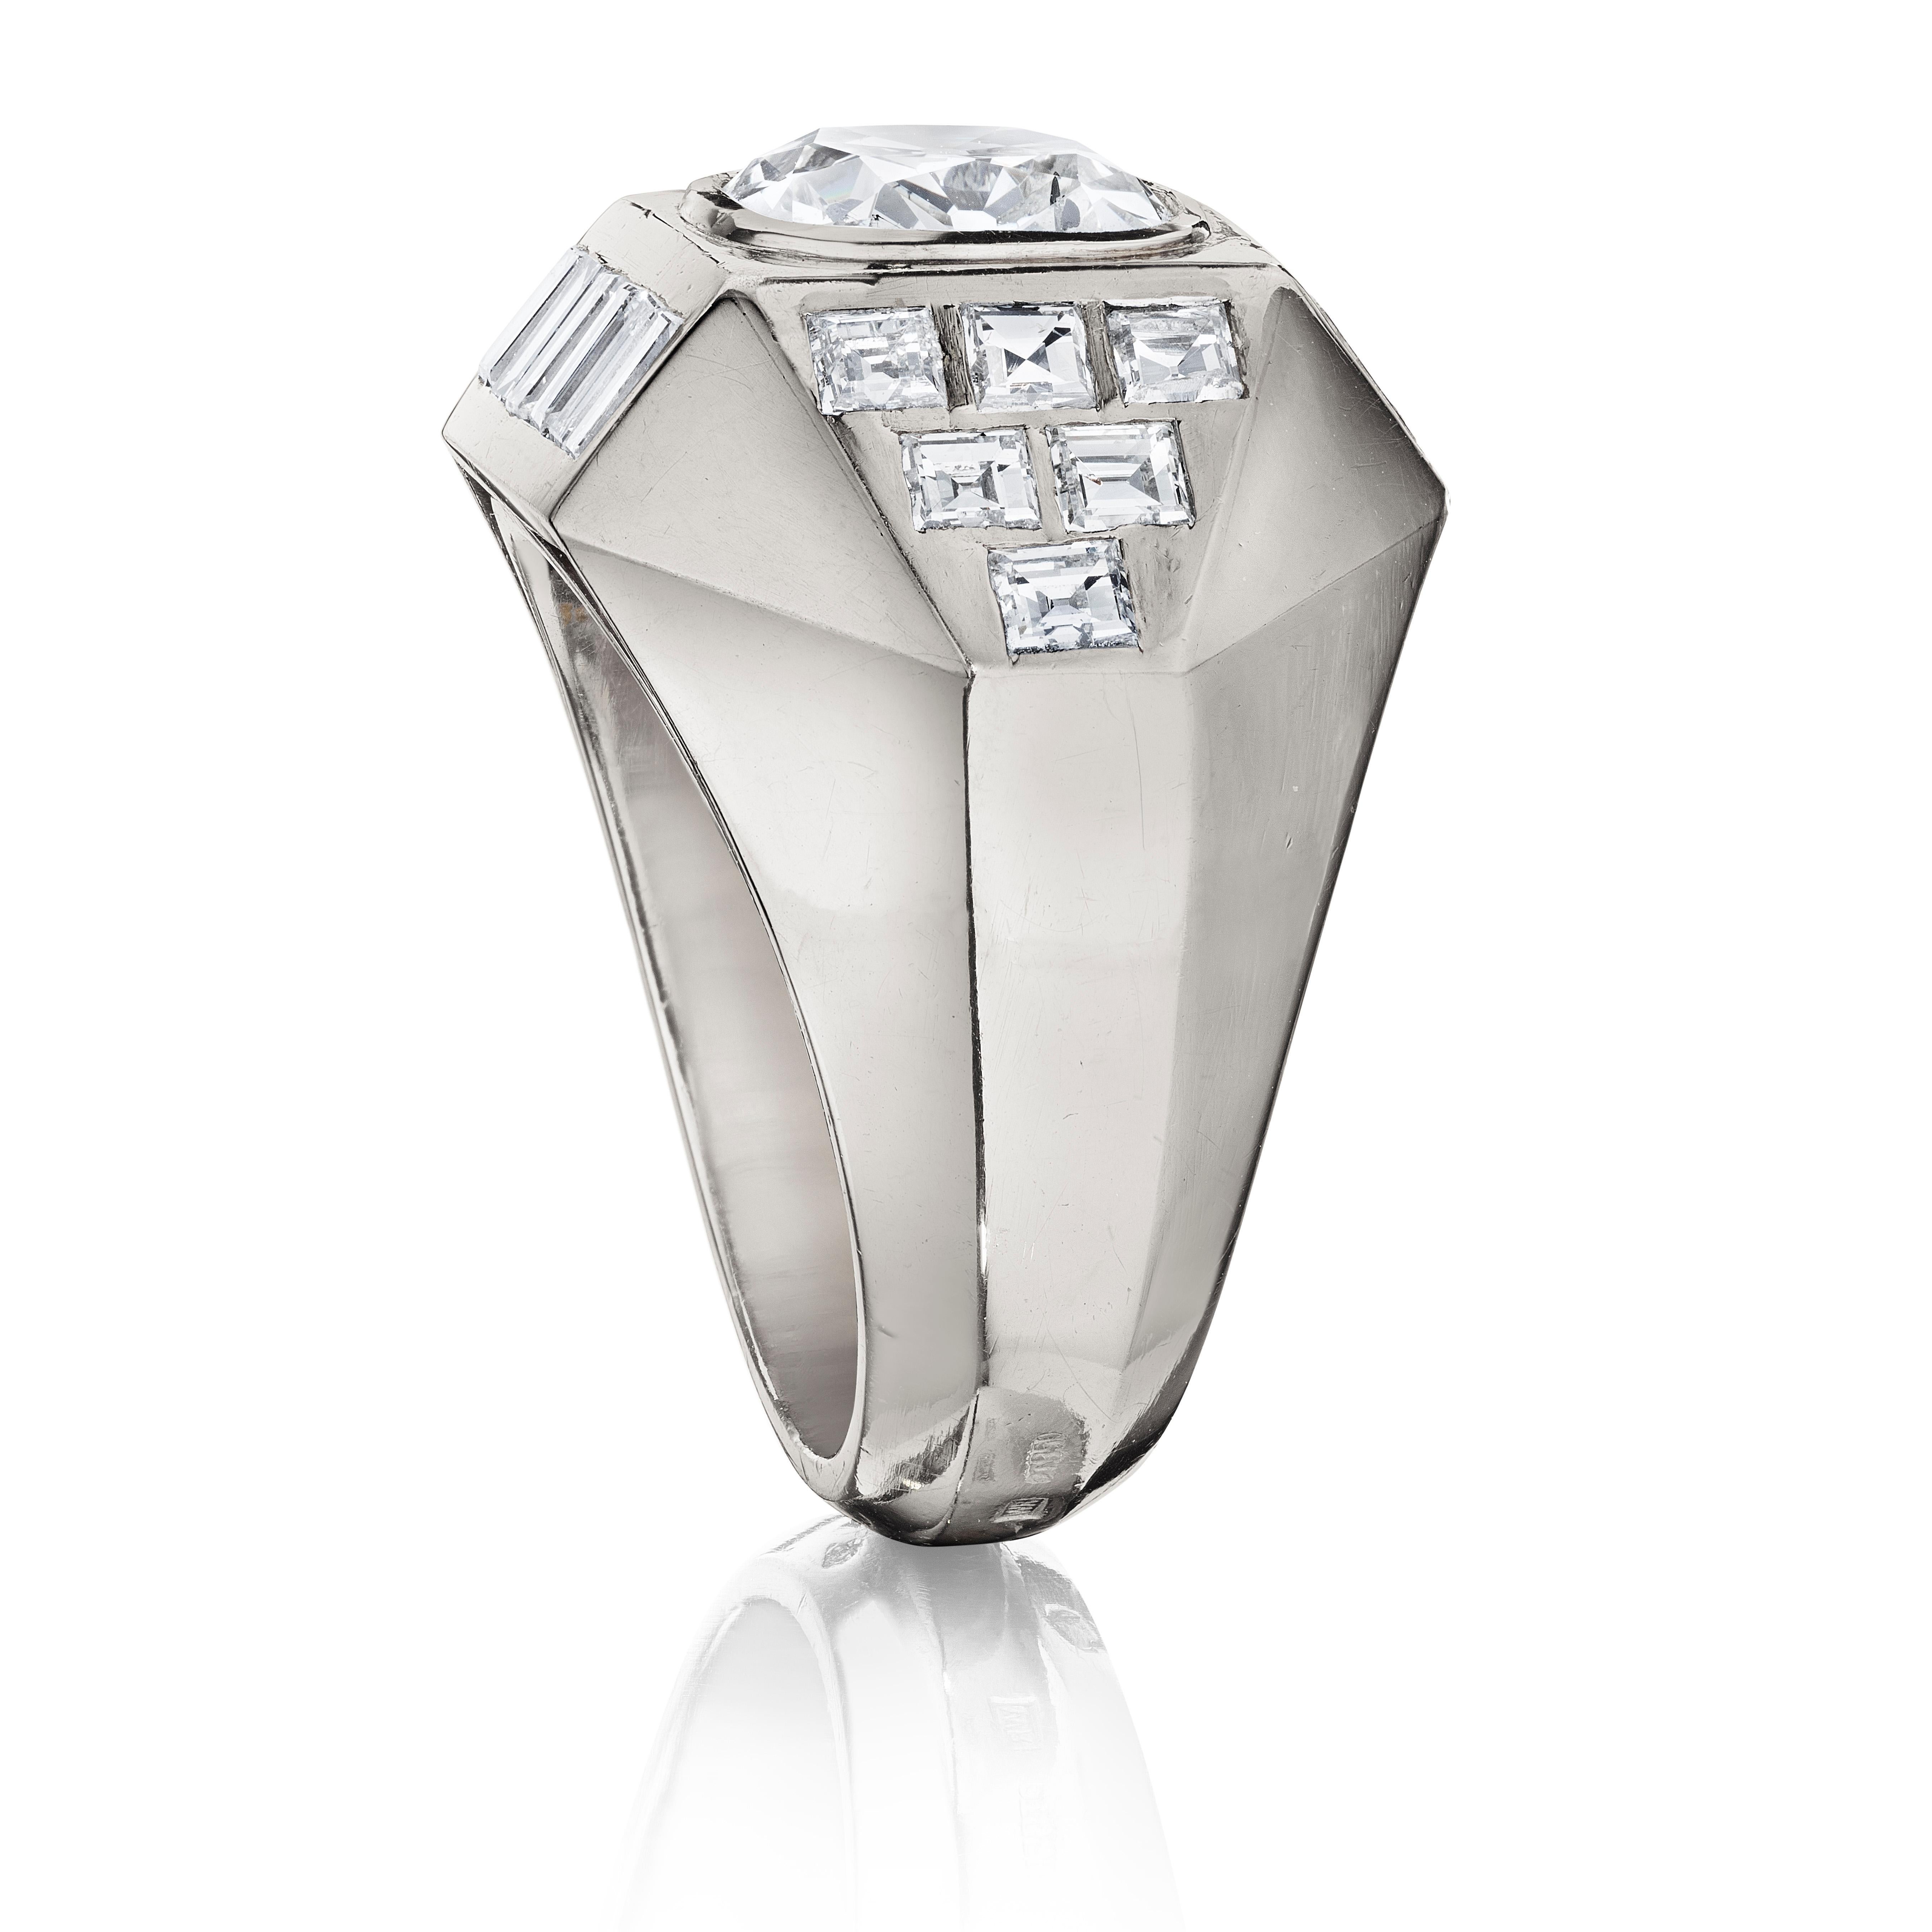 A ring designed with a central bezel-set cushion diamond sided by intersecting platinum planes set with square and rectangular diamonds; mounted in platinum, with French assay marks
• 1 cushion-cut diamond, weighing approximately 2.95 carats
• 12